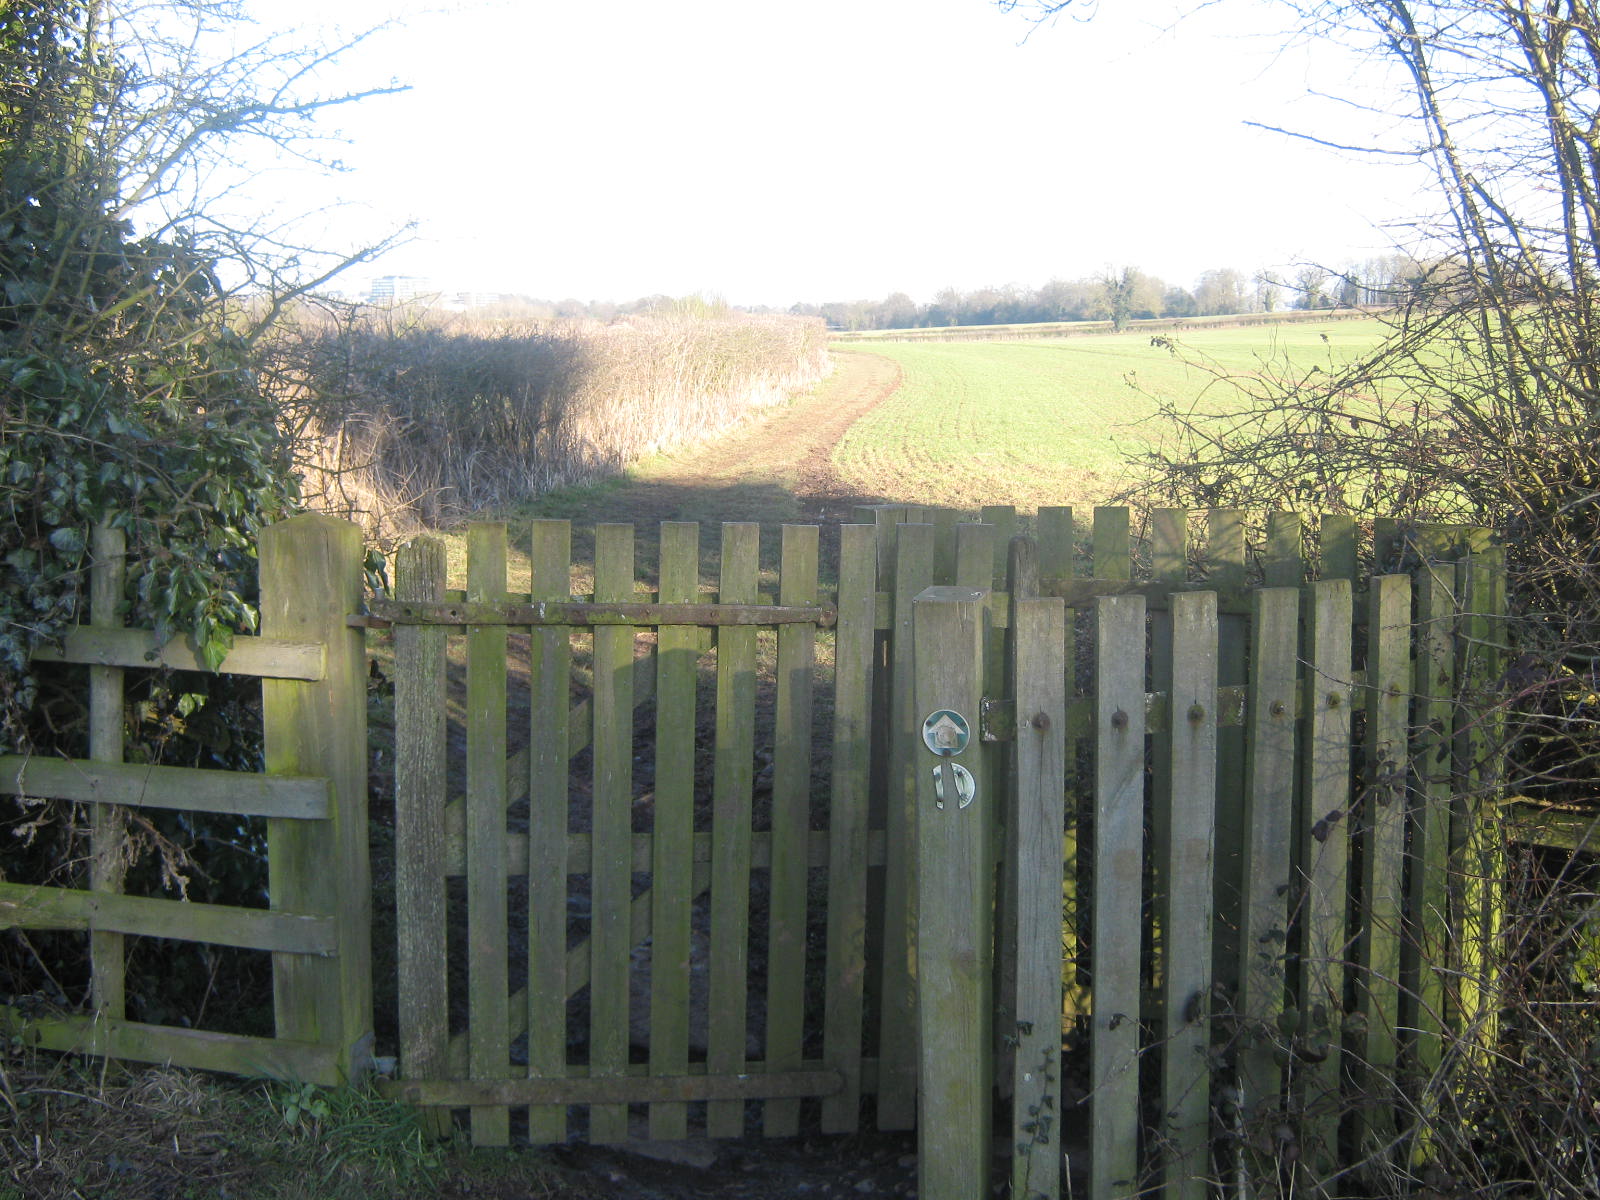 a wood fence and gate in an open field